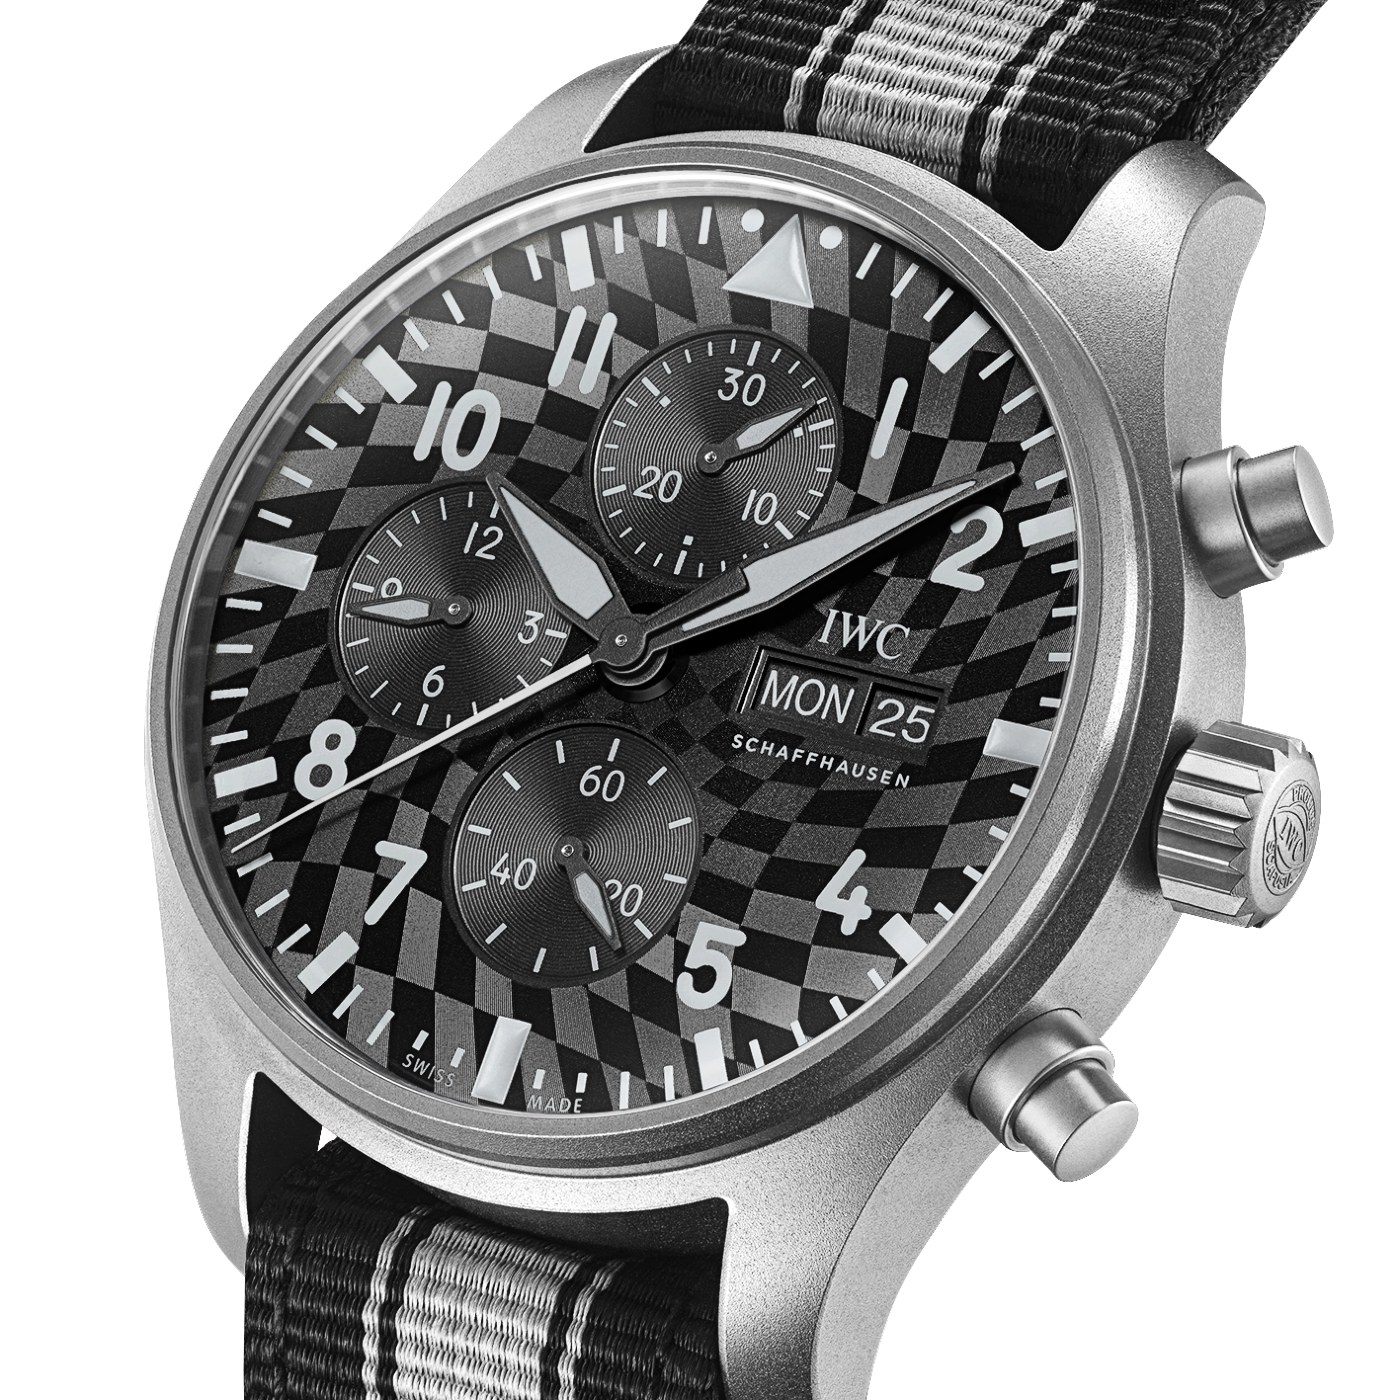 the Pilot’s Watch Chronograph Edition IWC x Hot Wheels Racing Works